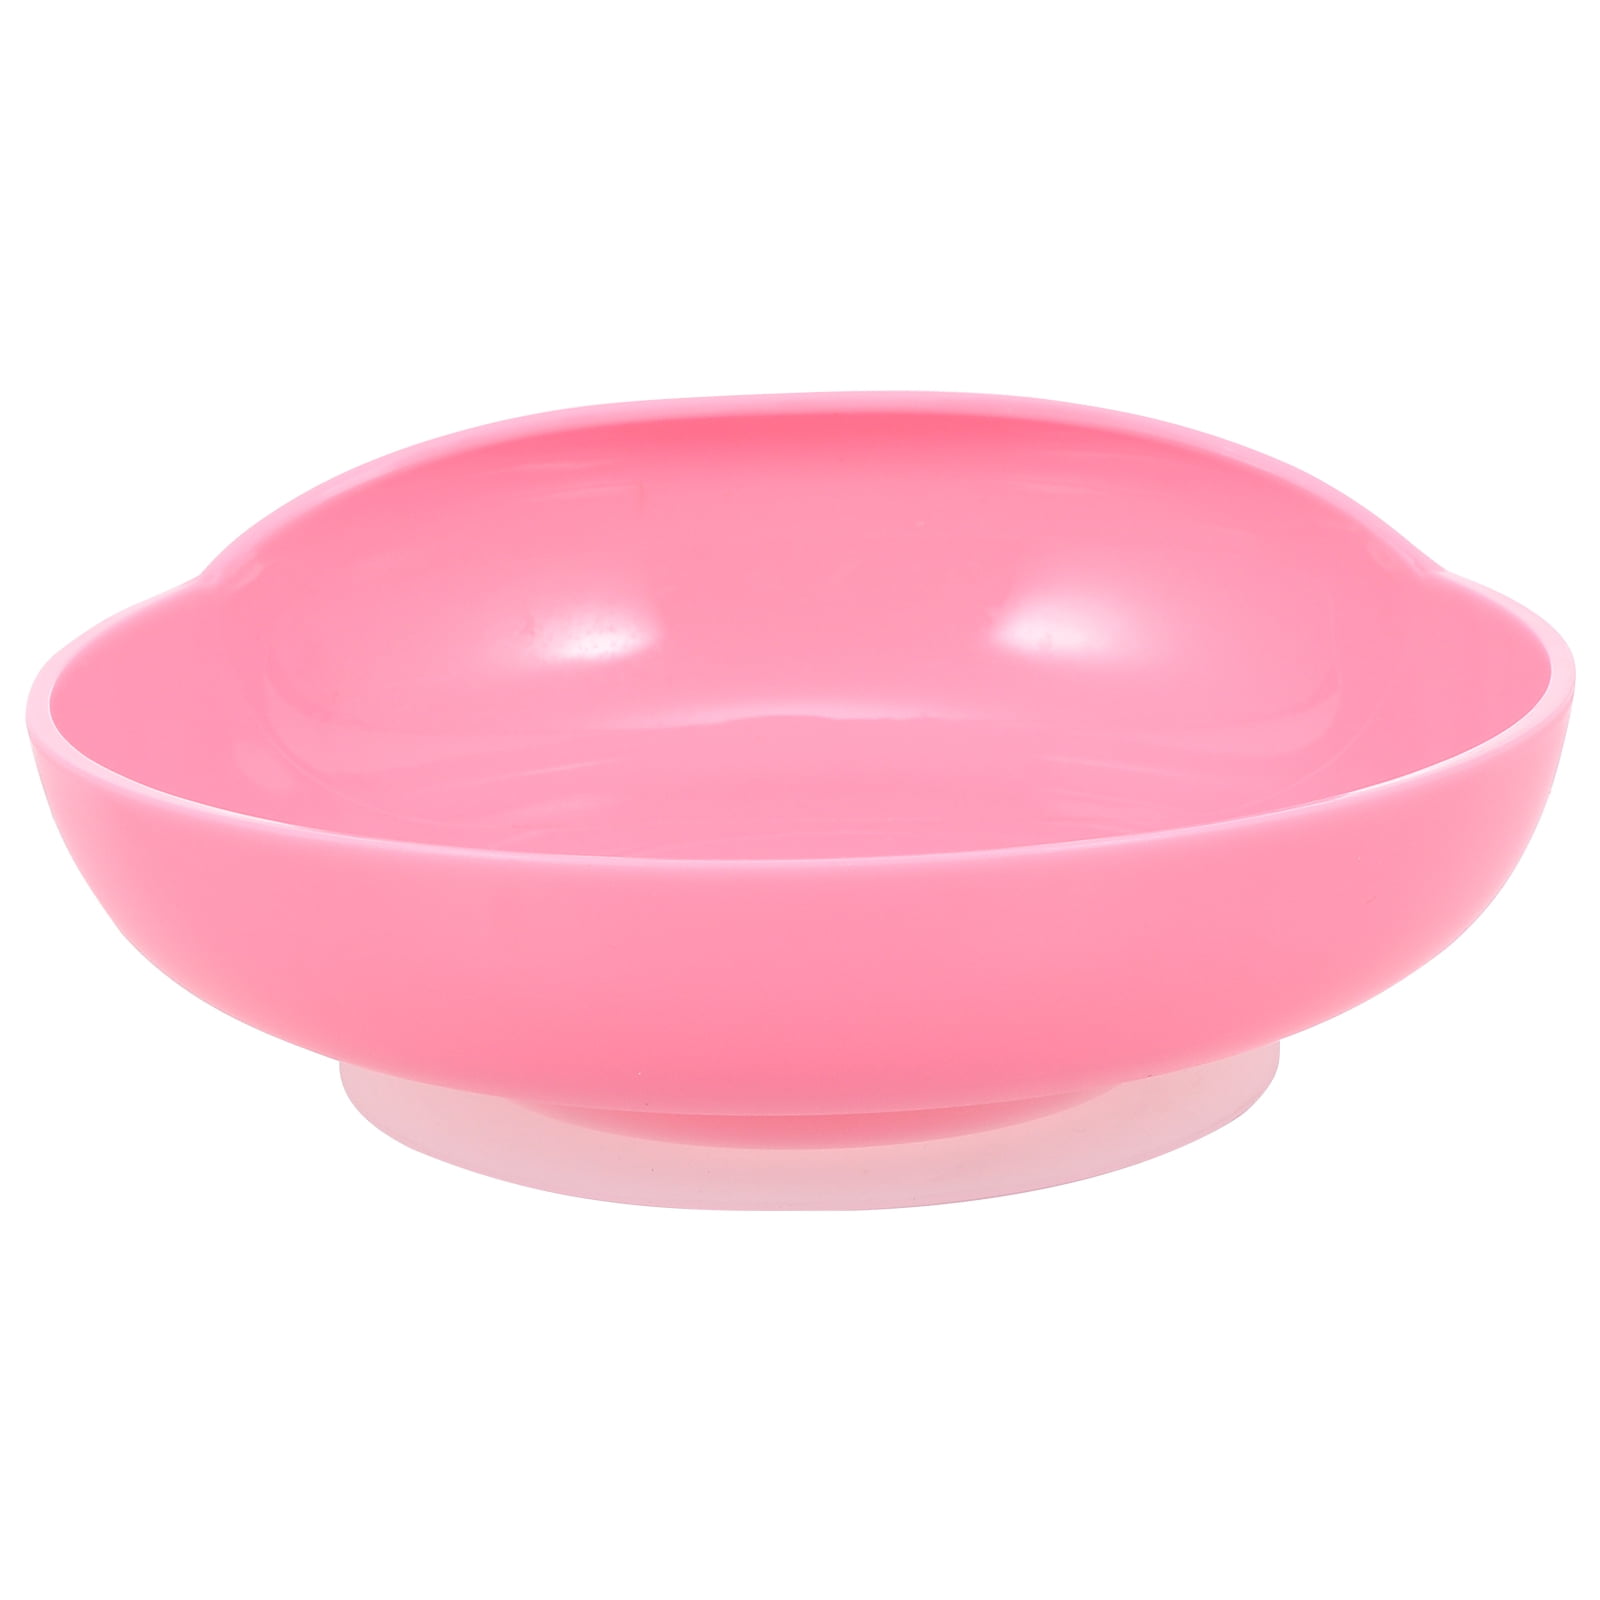 Freedom Dinnerware Snack Bowl with Suction Pad Base